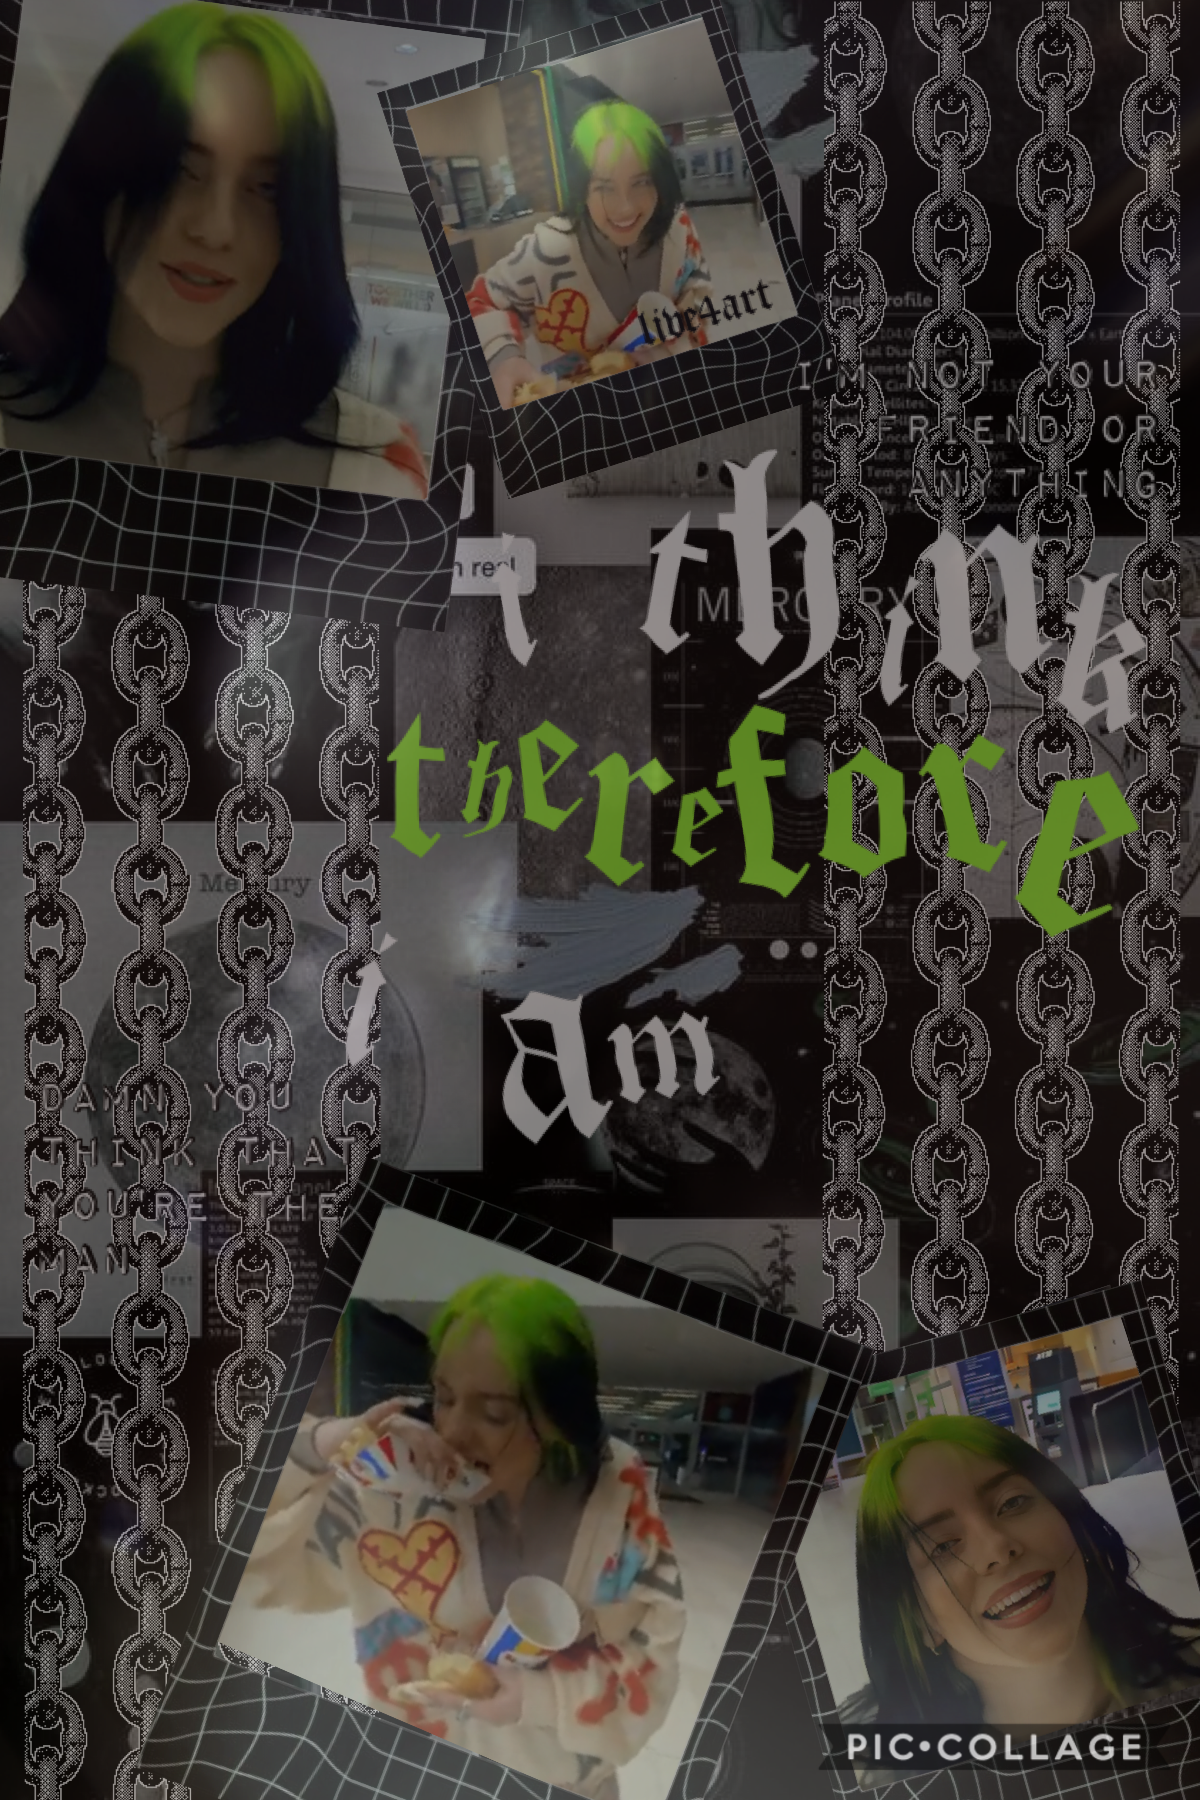 💚tap💚

have you streamed billie's new single "therefore i am"? if not check it out! also don't forget to watch the music video on youtube, it's AMAZING